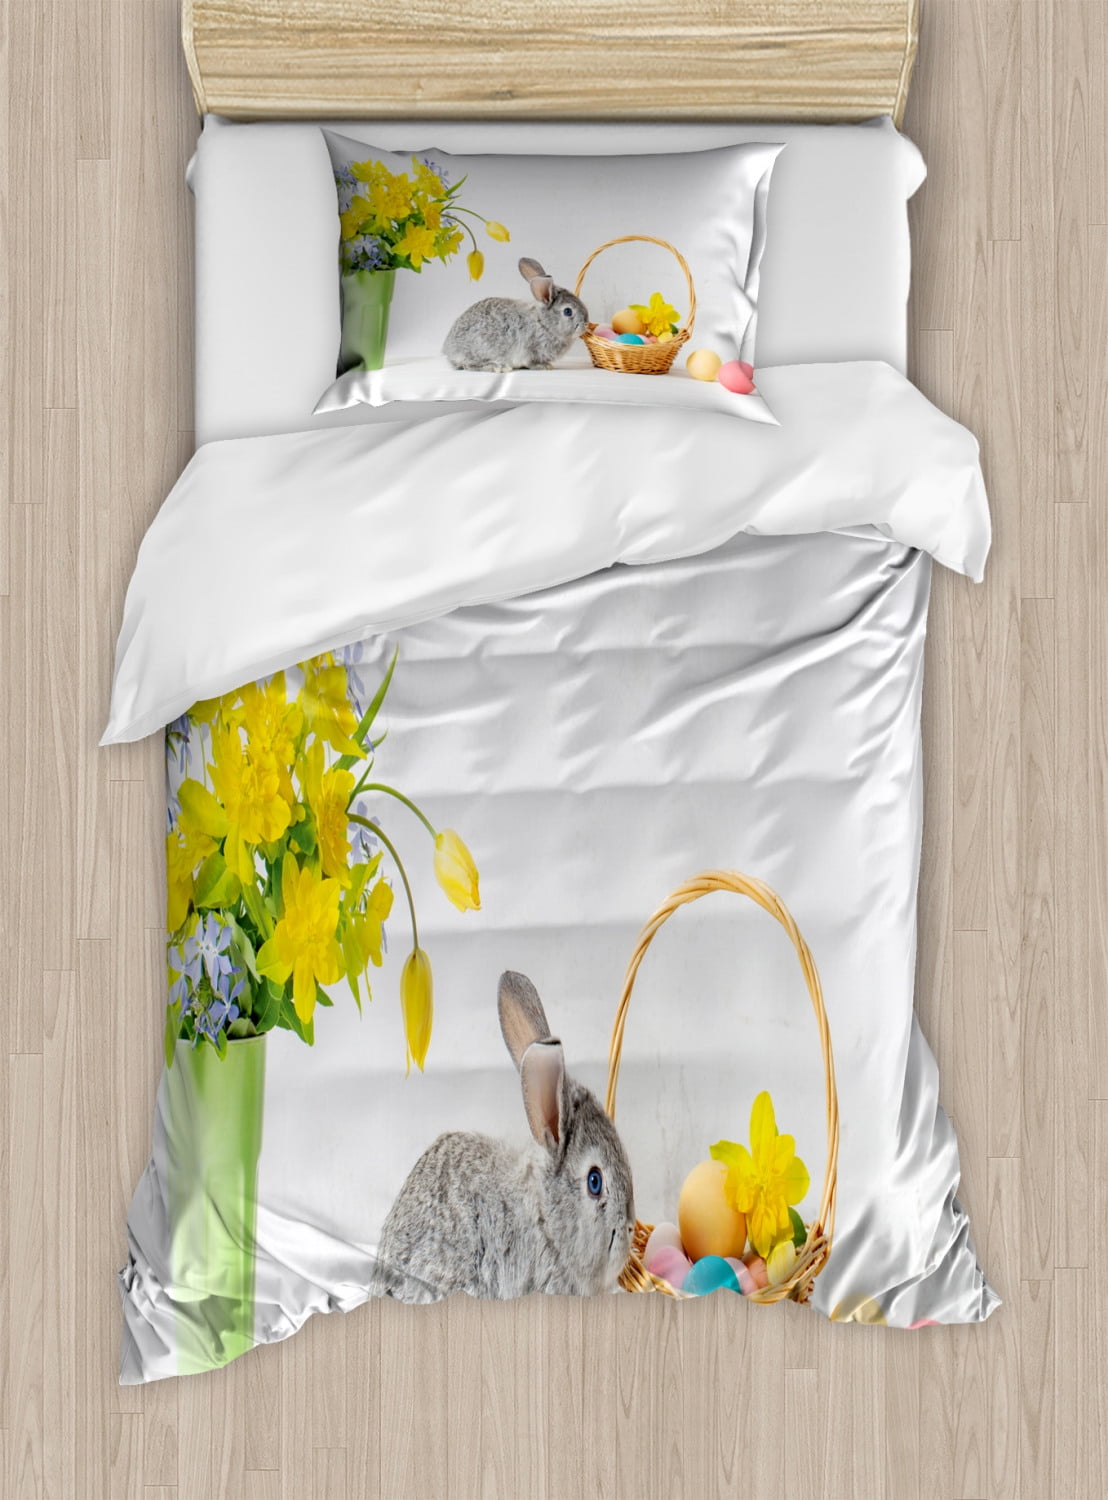 Easter Bunny Duvet Cover Set Twin Size, Vivid Yellow Flowers Grey ...